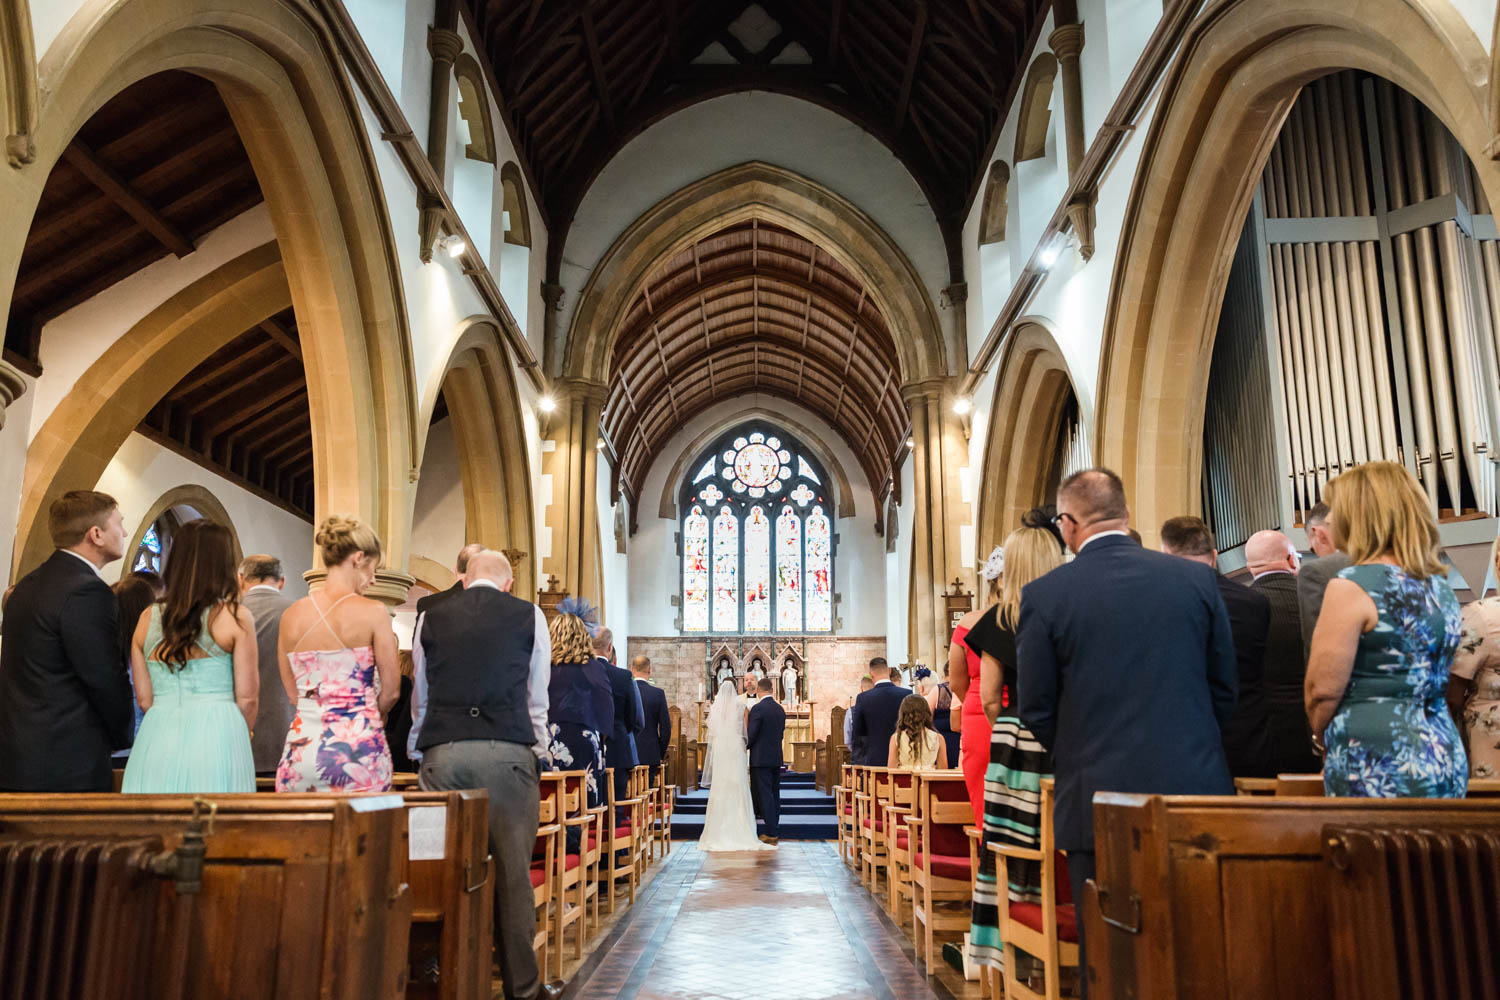 St Martins church, Caerphilly in all its glory with south wales wedding photographer